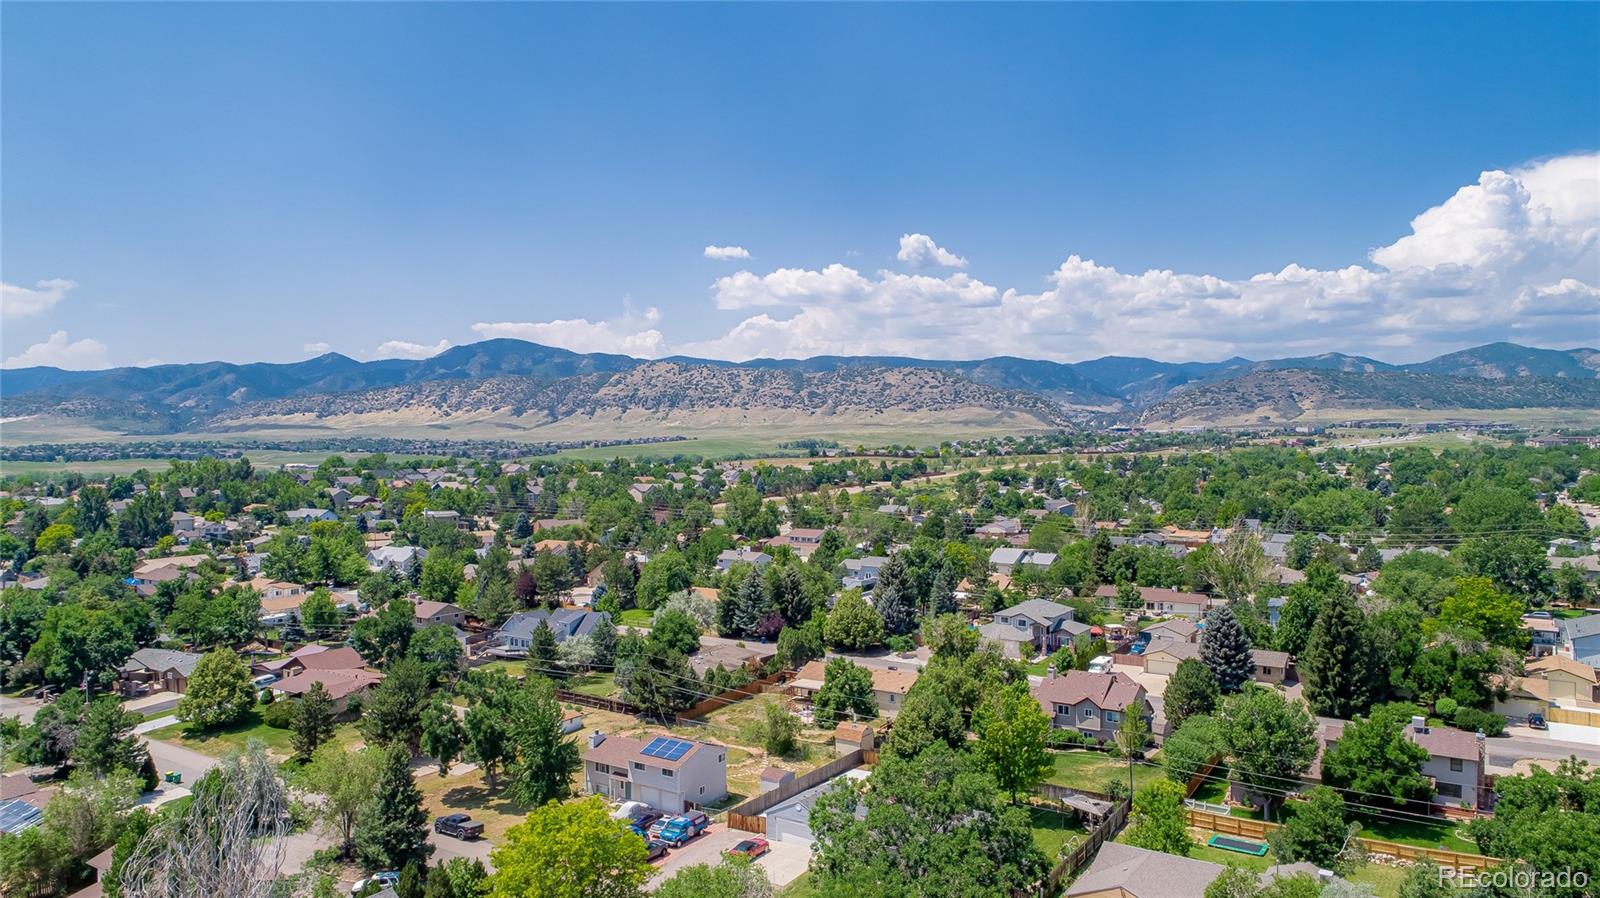 Report Image for 8611 S Ammons Street,Littleton, Colorado